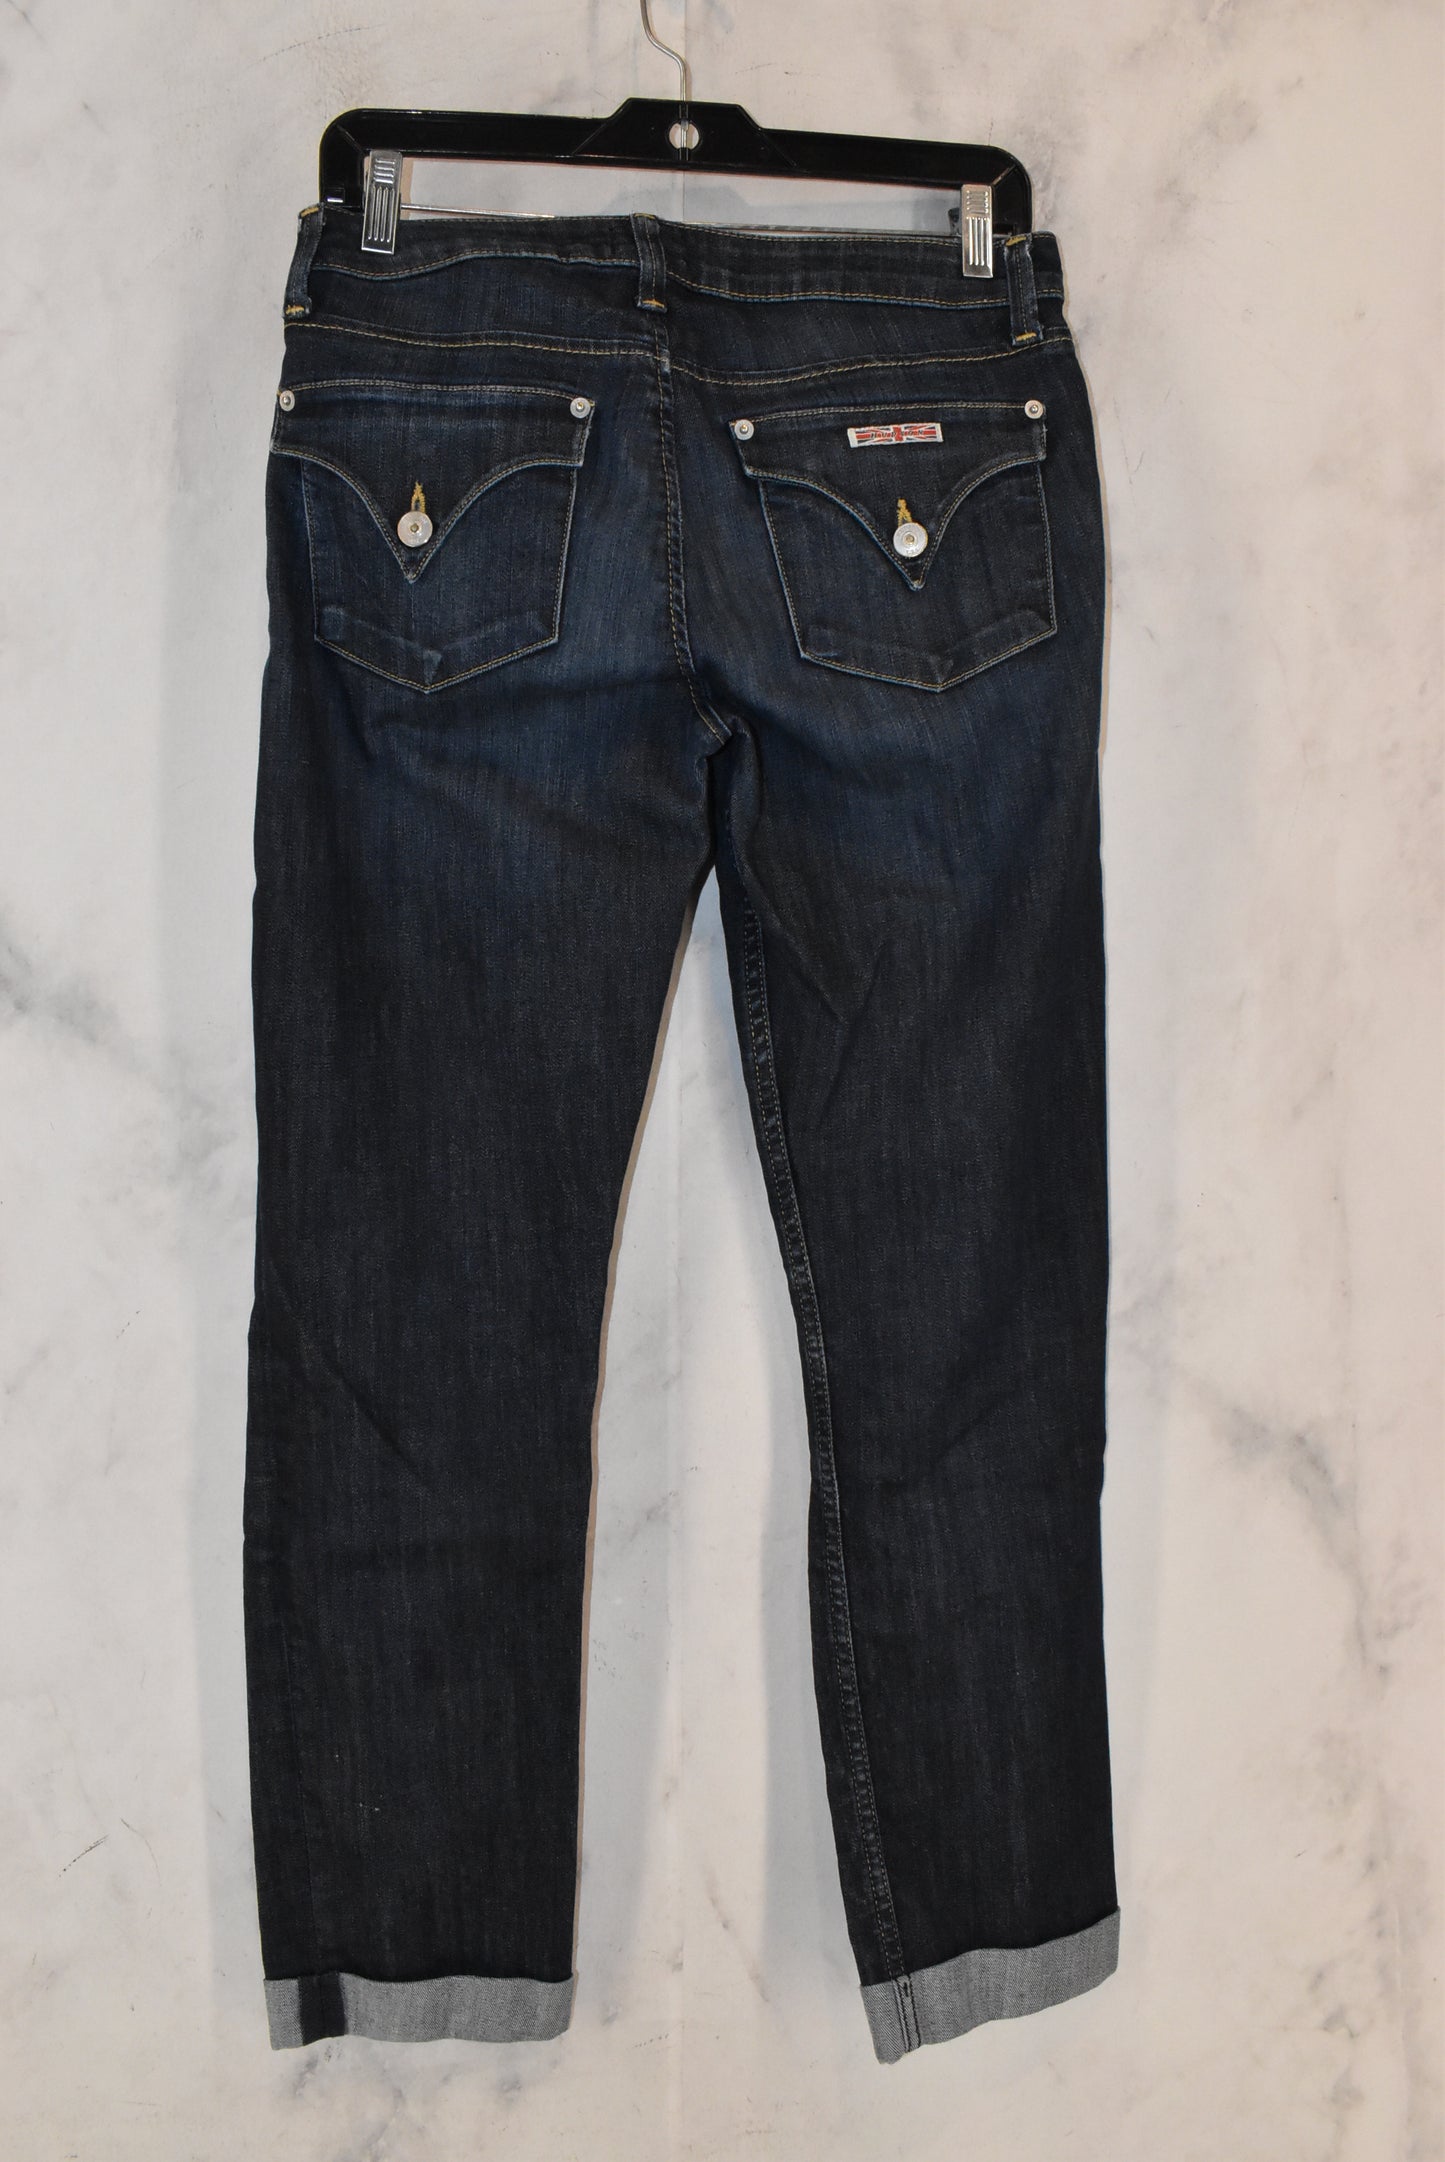 Jeans Relaxed/boyfriend By Hudson  Size: 28